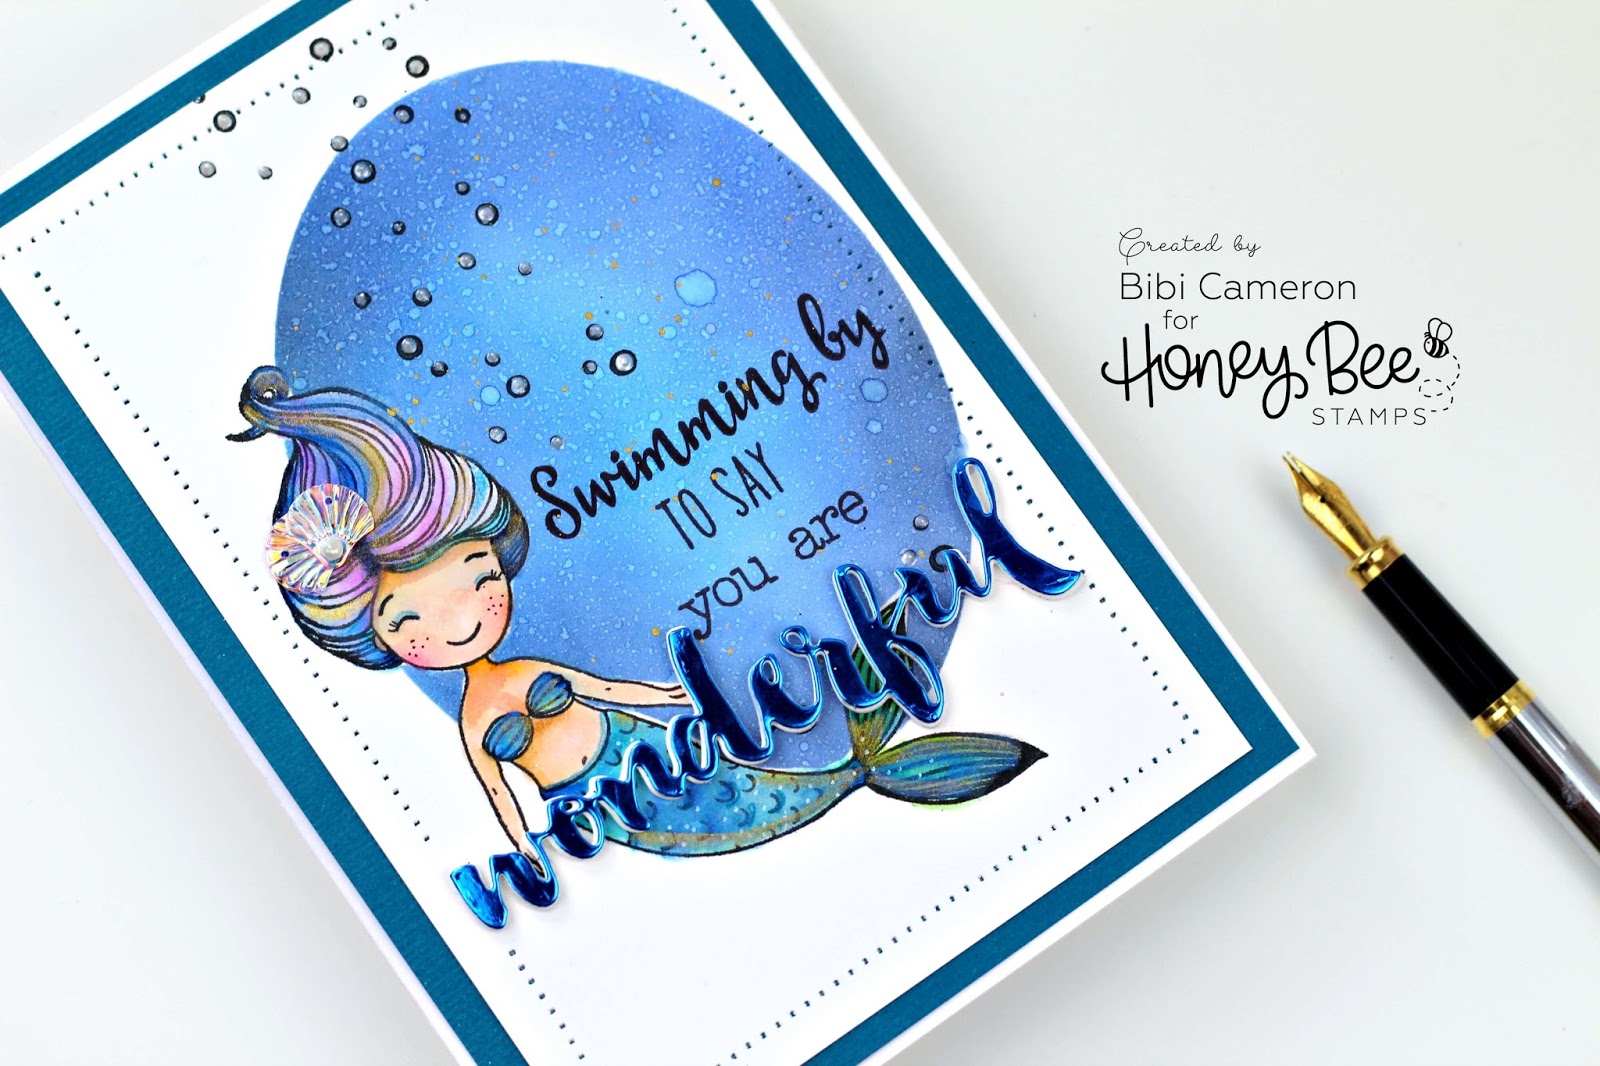 Swimming by to say you are wonderful |  Stamping for Autism Awareness